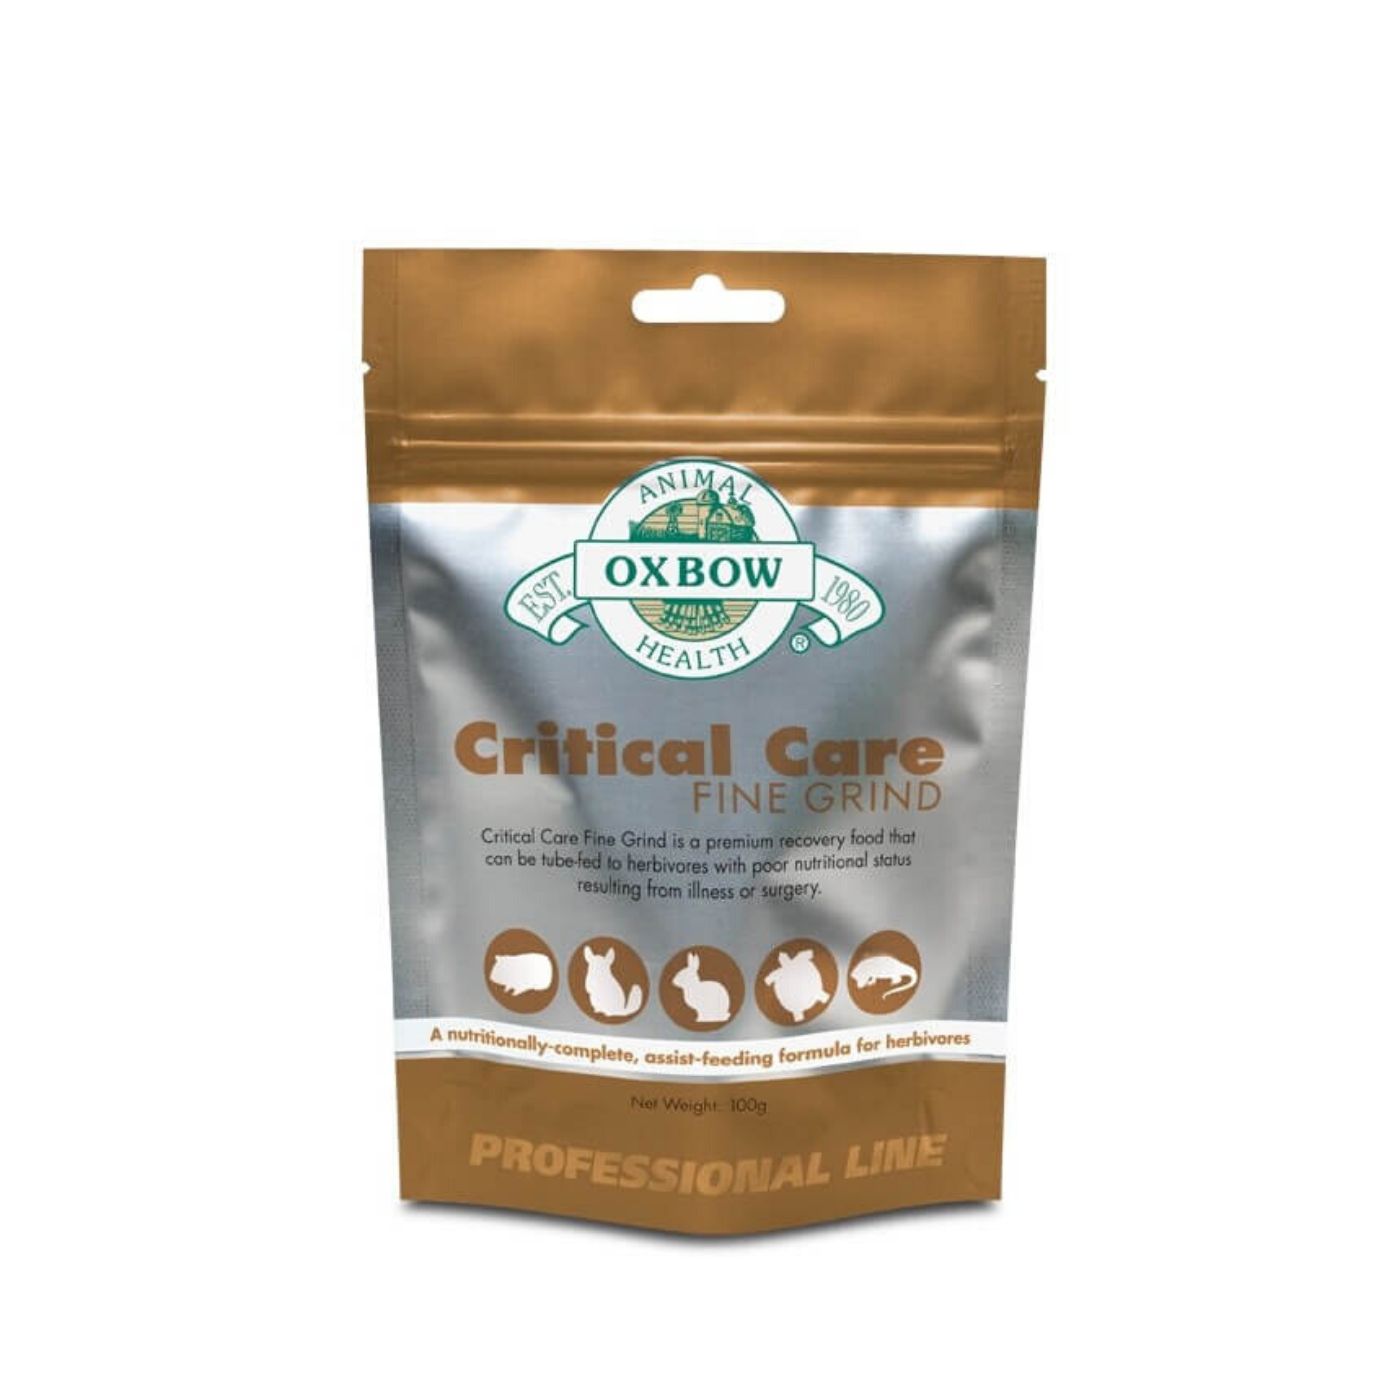 Image of Critical Care Fine Grind Oxbow 100g